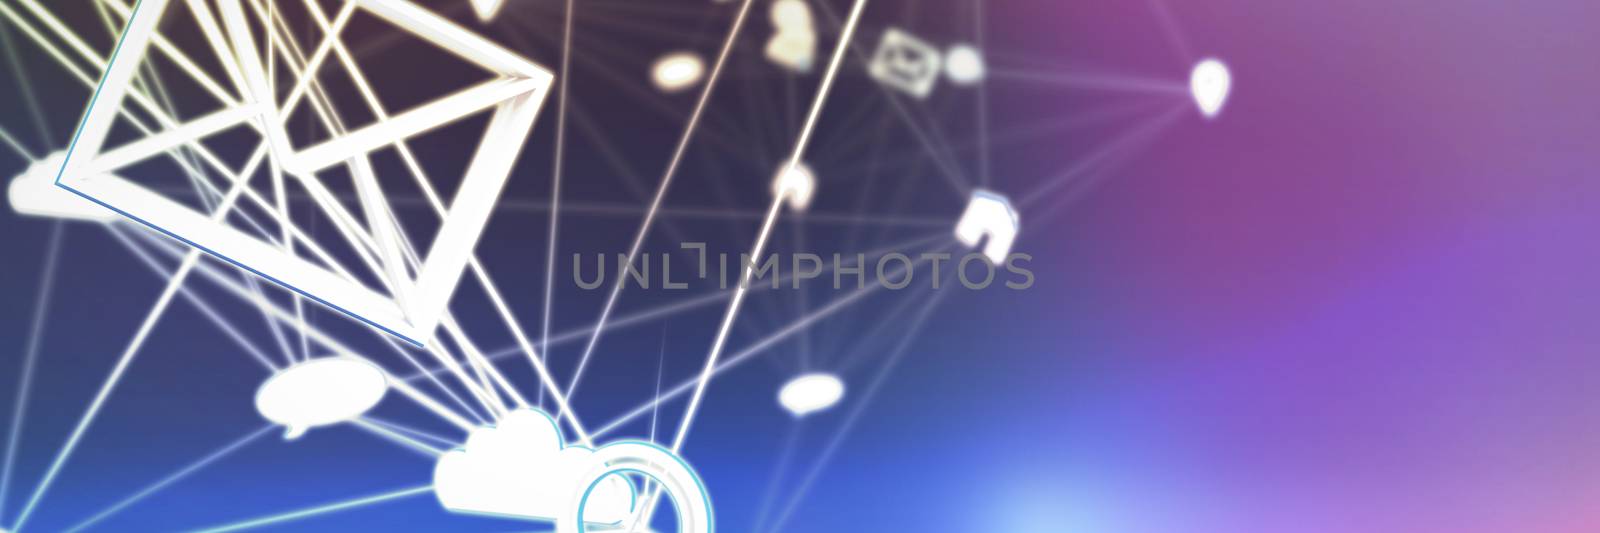 Composite image of lines connecting various networking icons by Wavebreakmedia